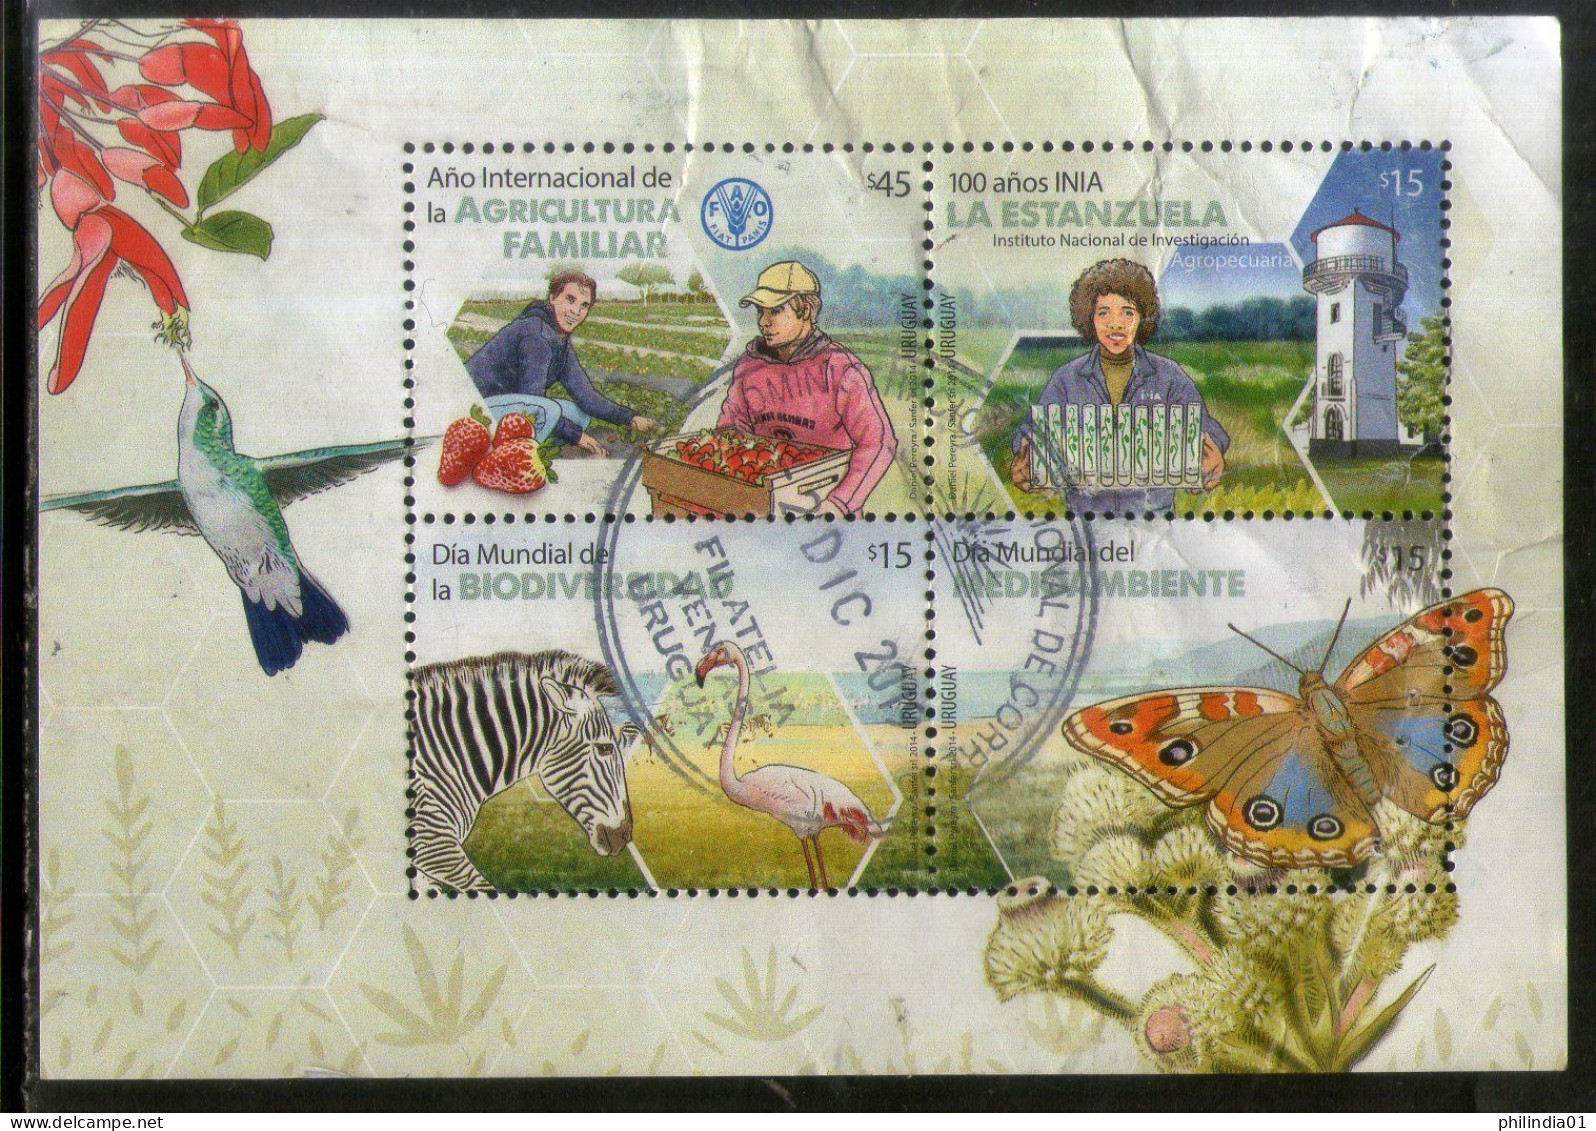 Uruguay 2014 Agriculture Biodiversity Animals Butterfly Bird Used M/s # 7641A - Agricultura